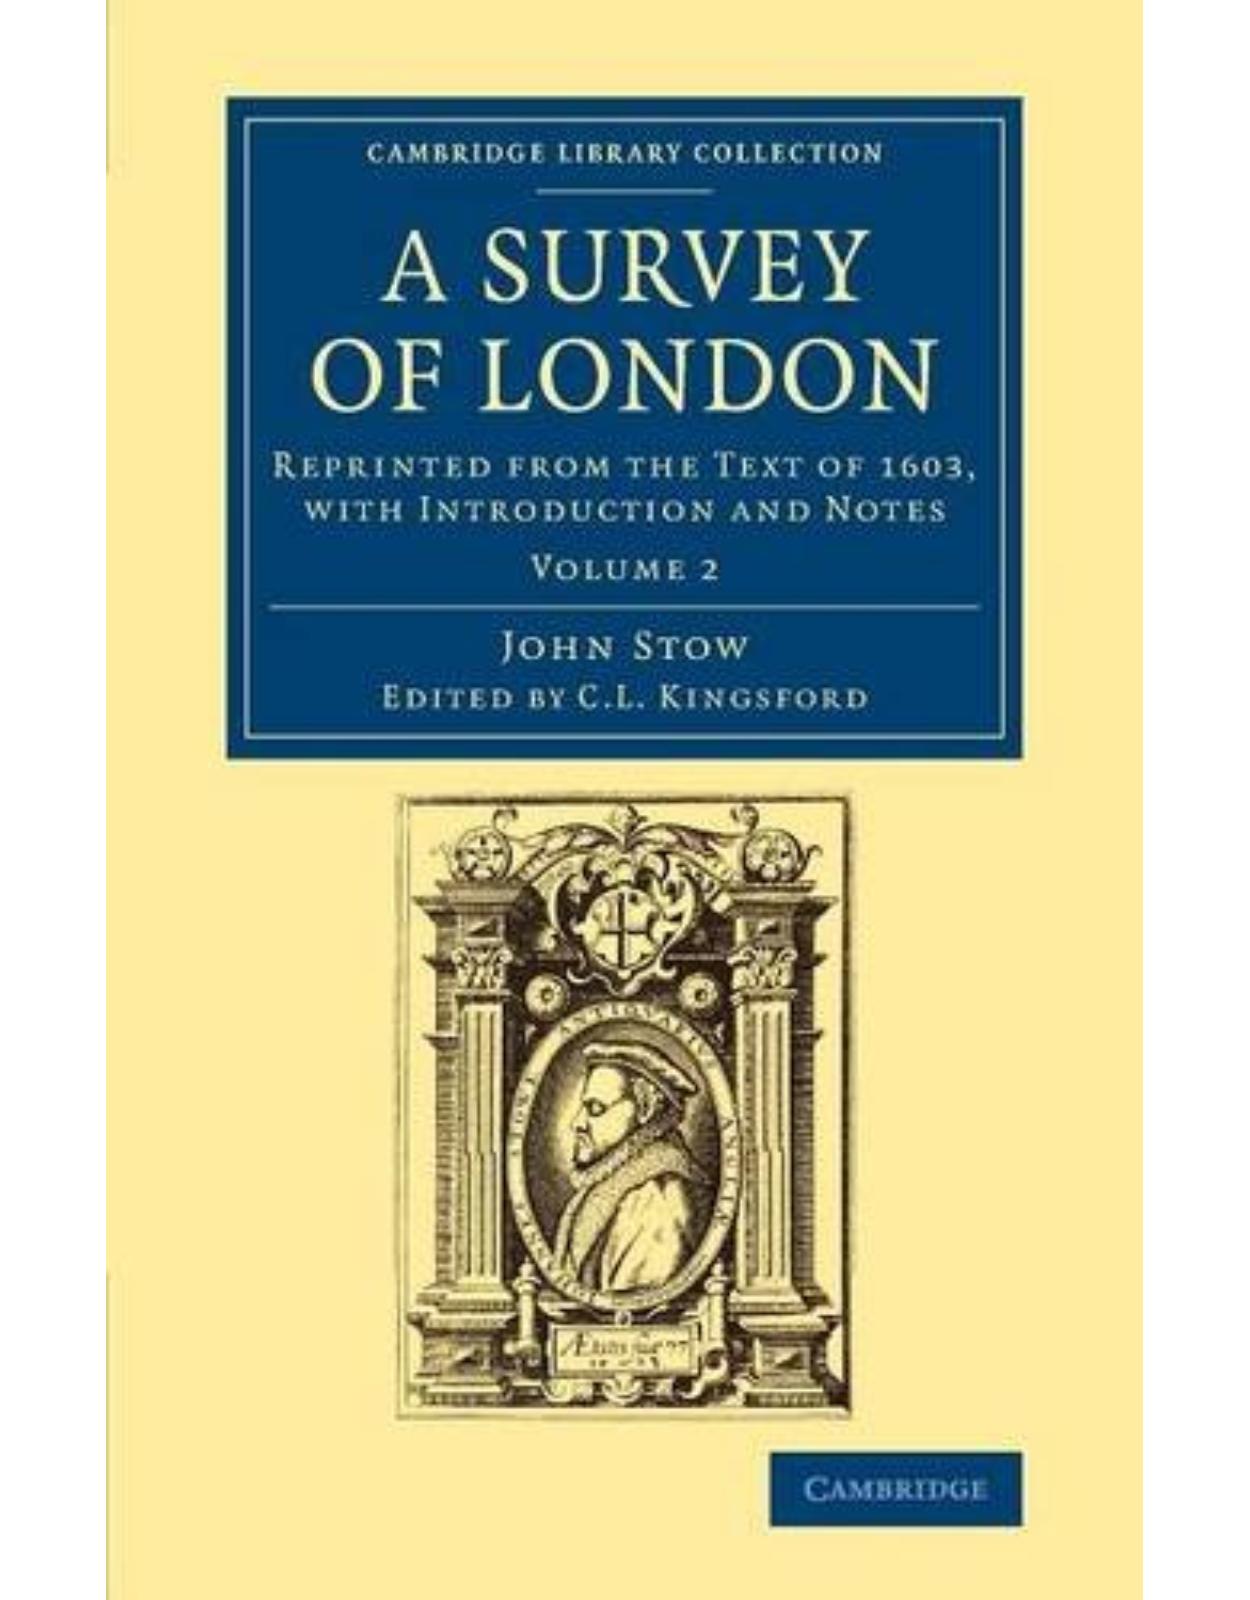 A Survey of London: Reprinted from the Text of 1603, with Introduction and Notes (Volume 2)